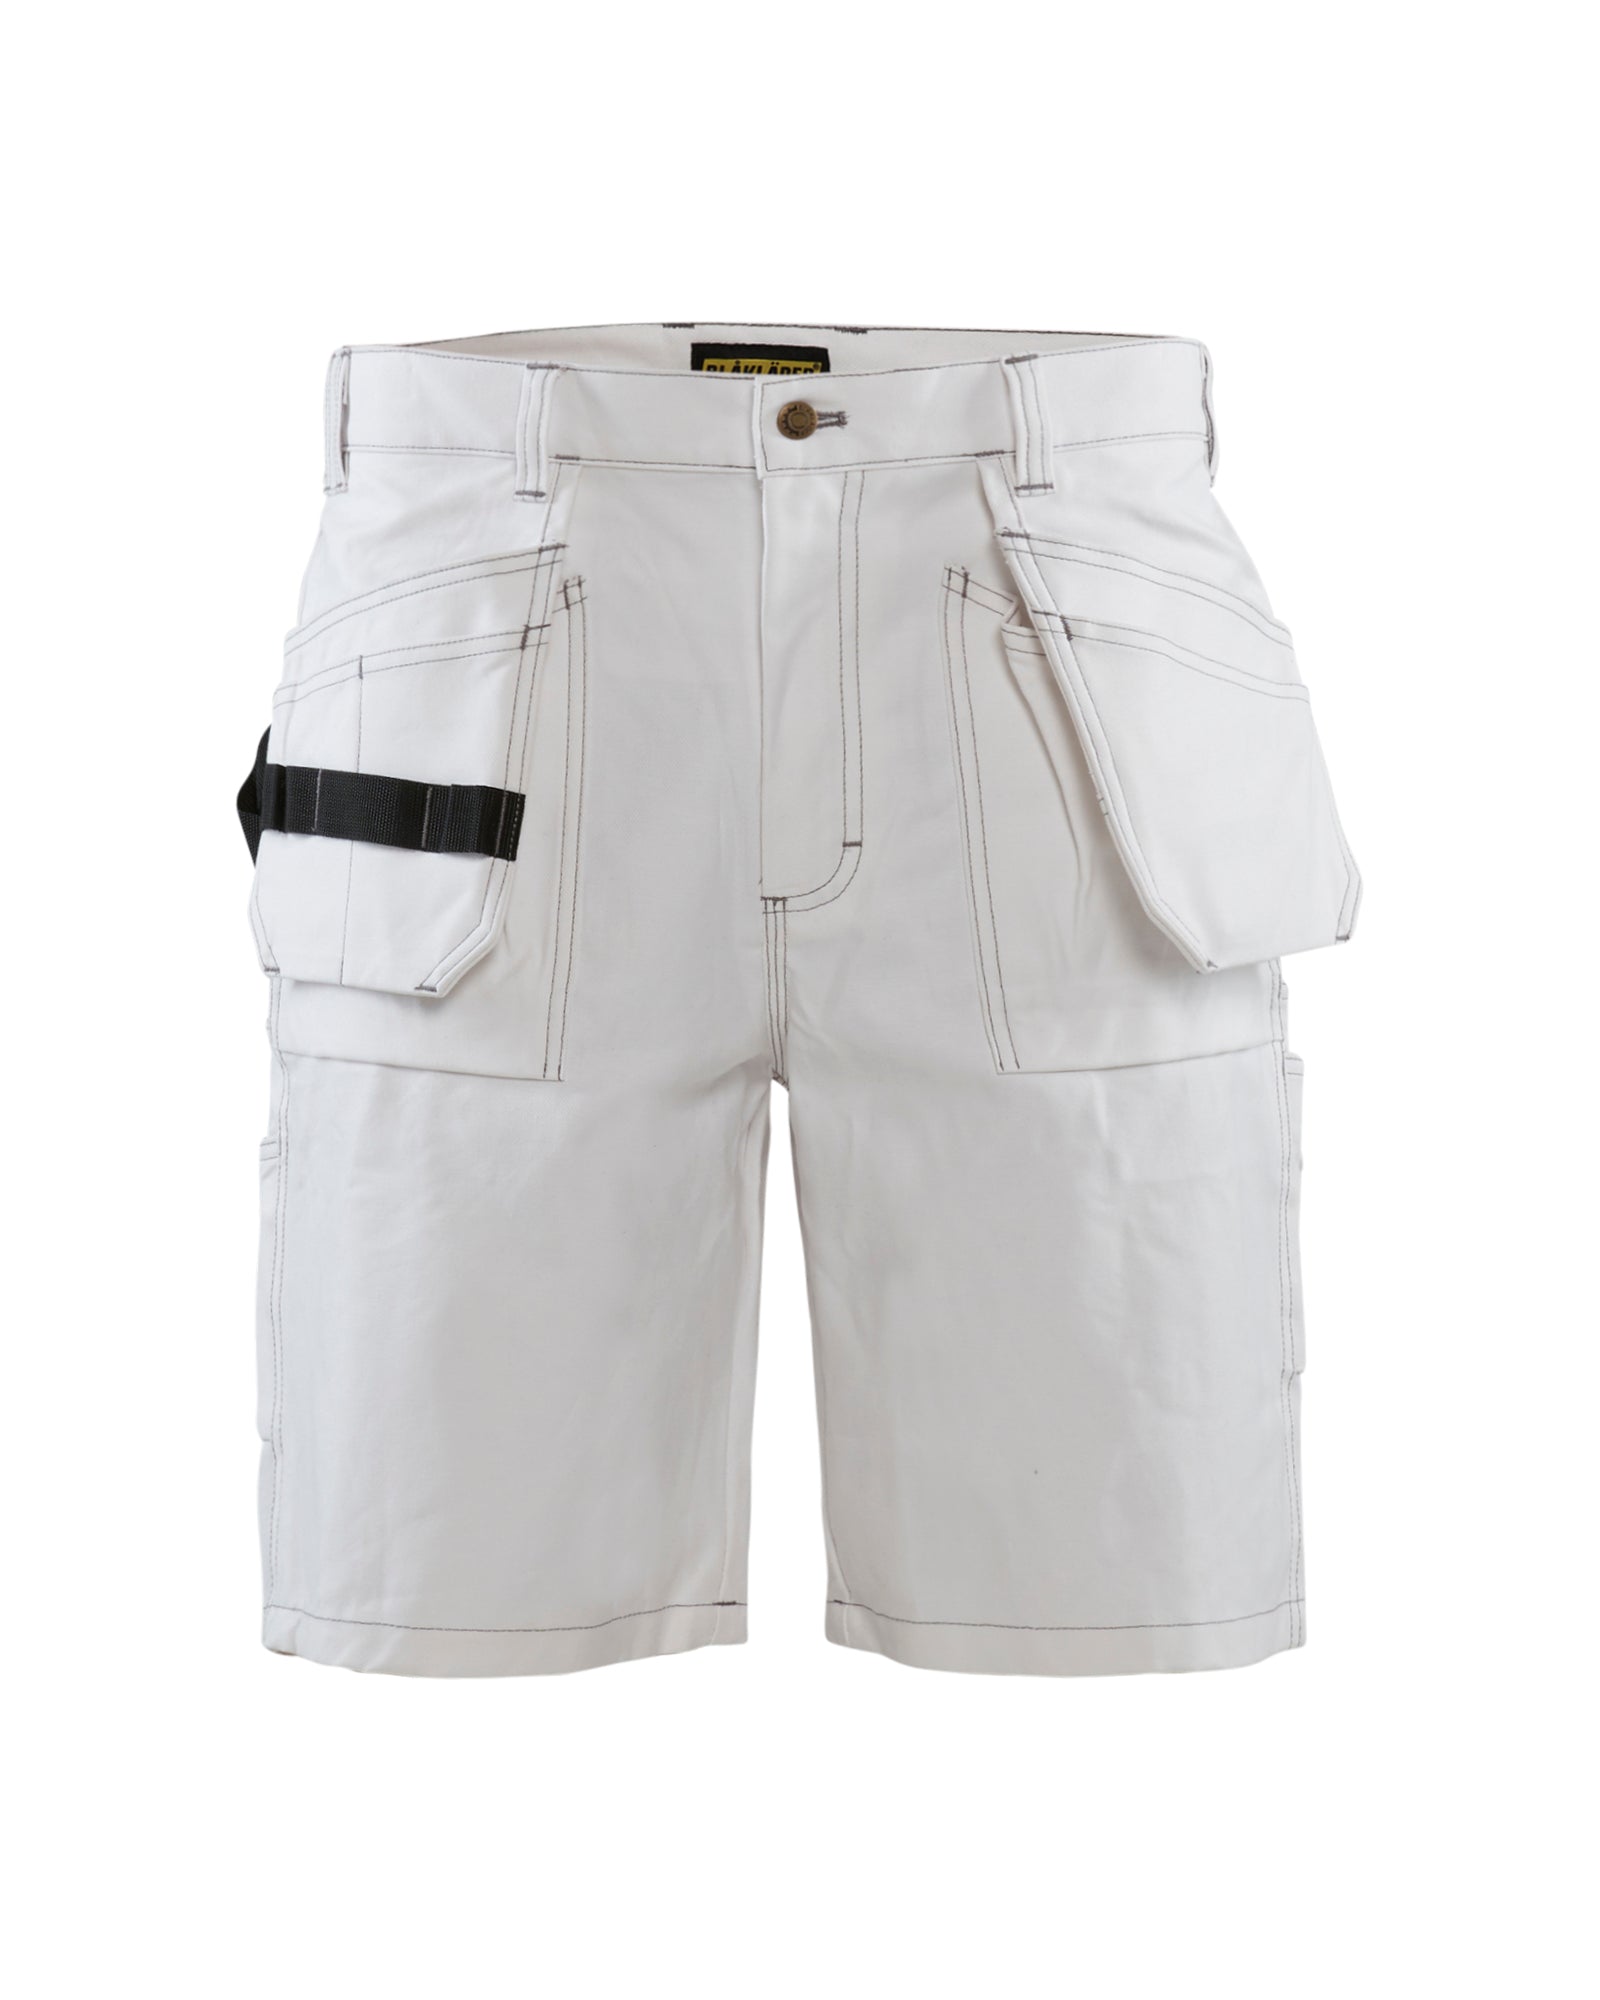 Men's Blaklader Painters Work Short in White Painter from the front view